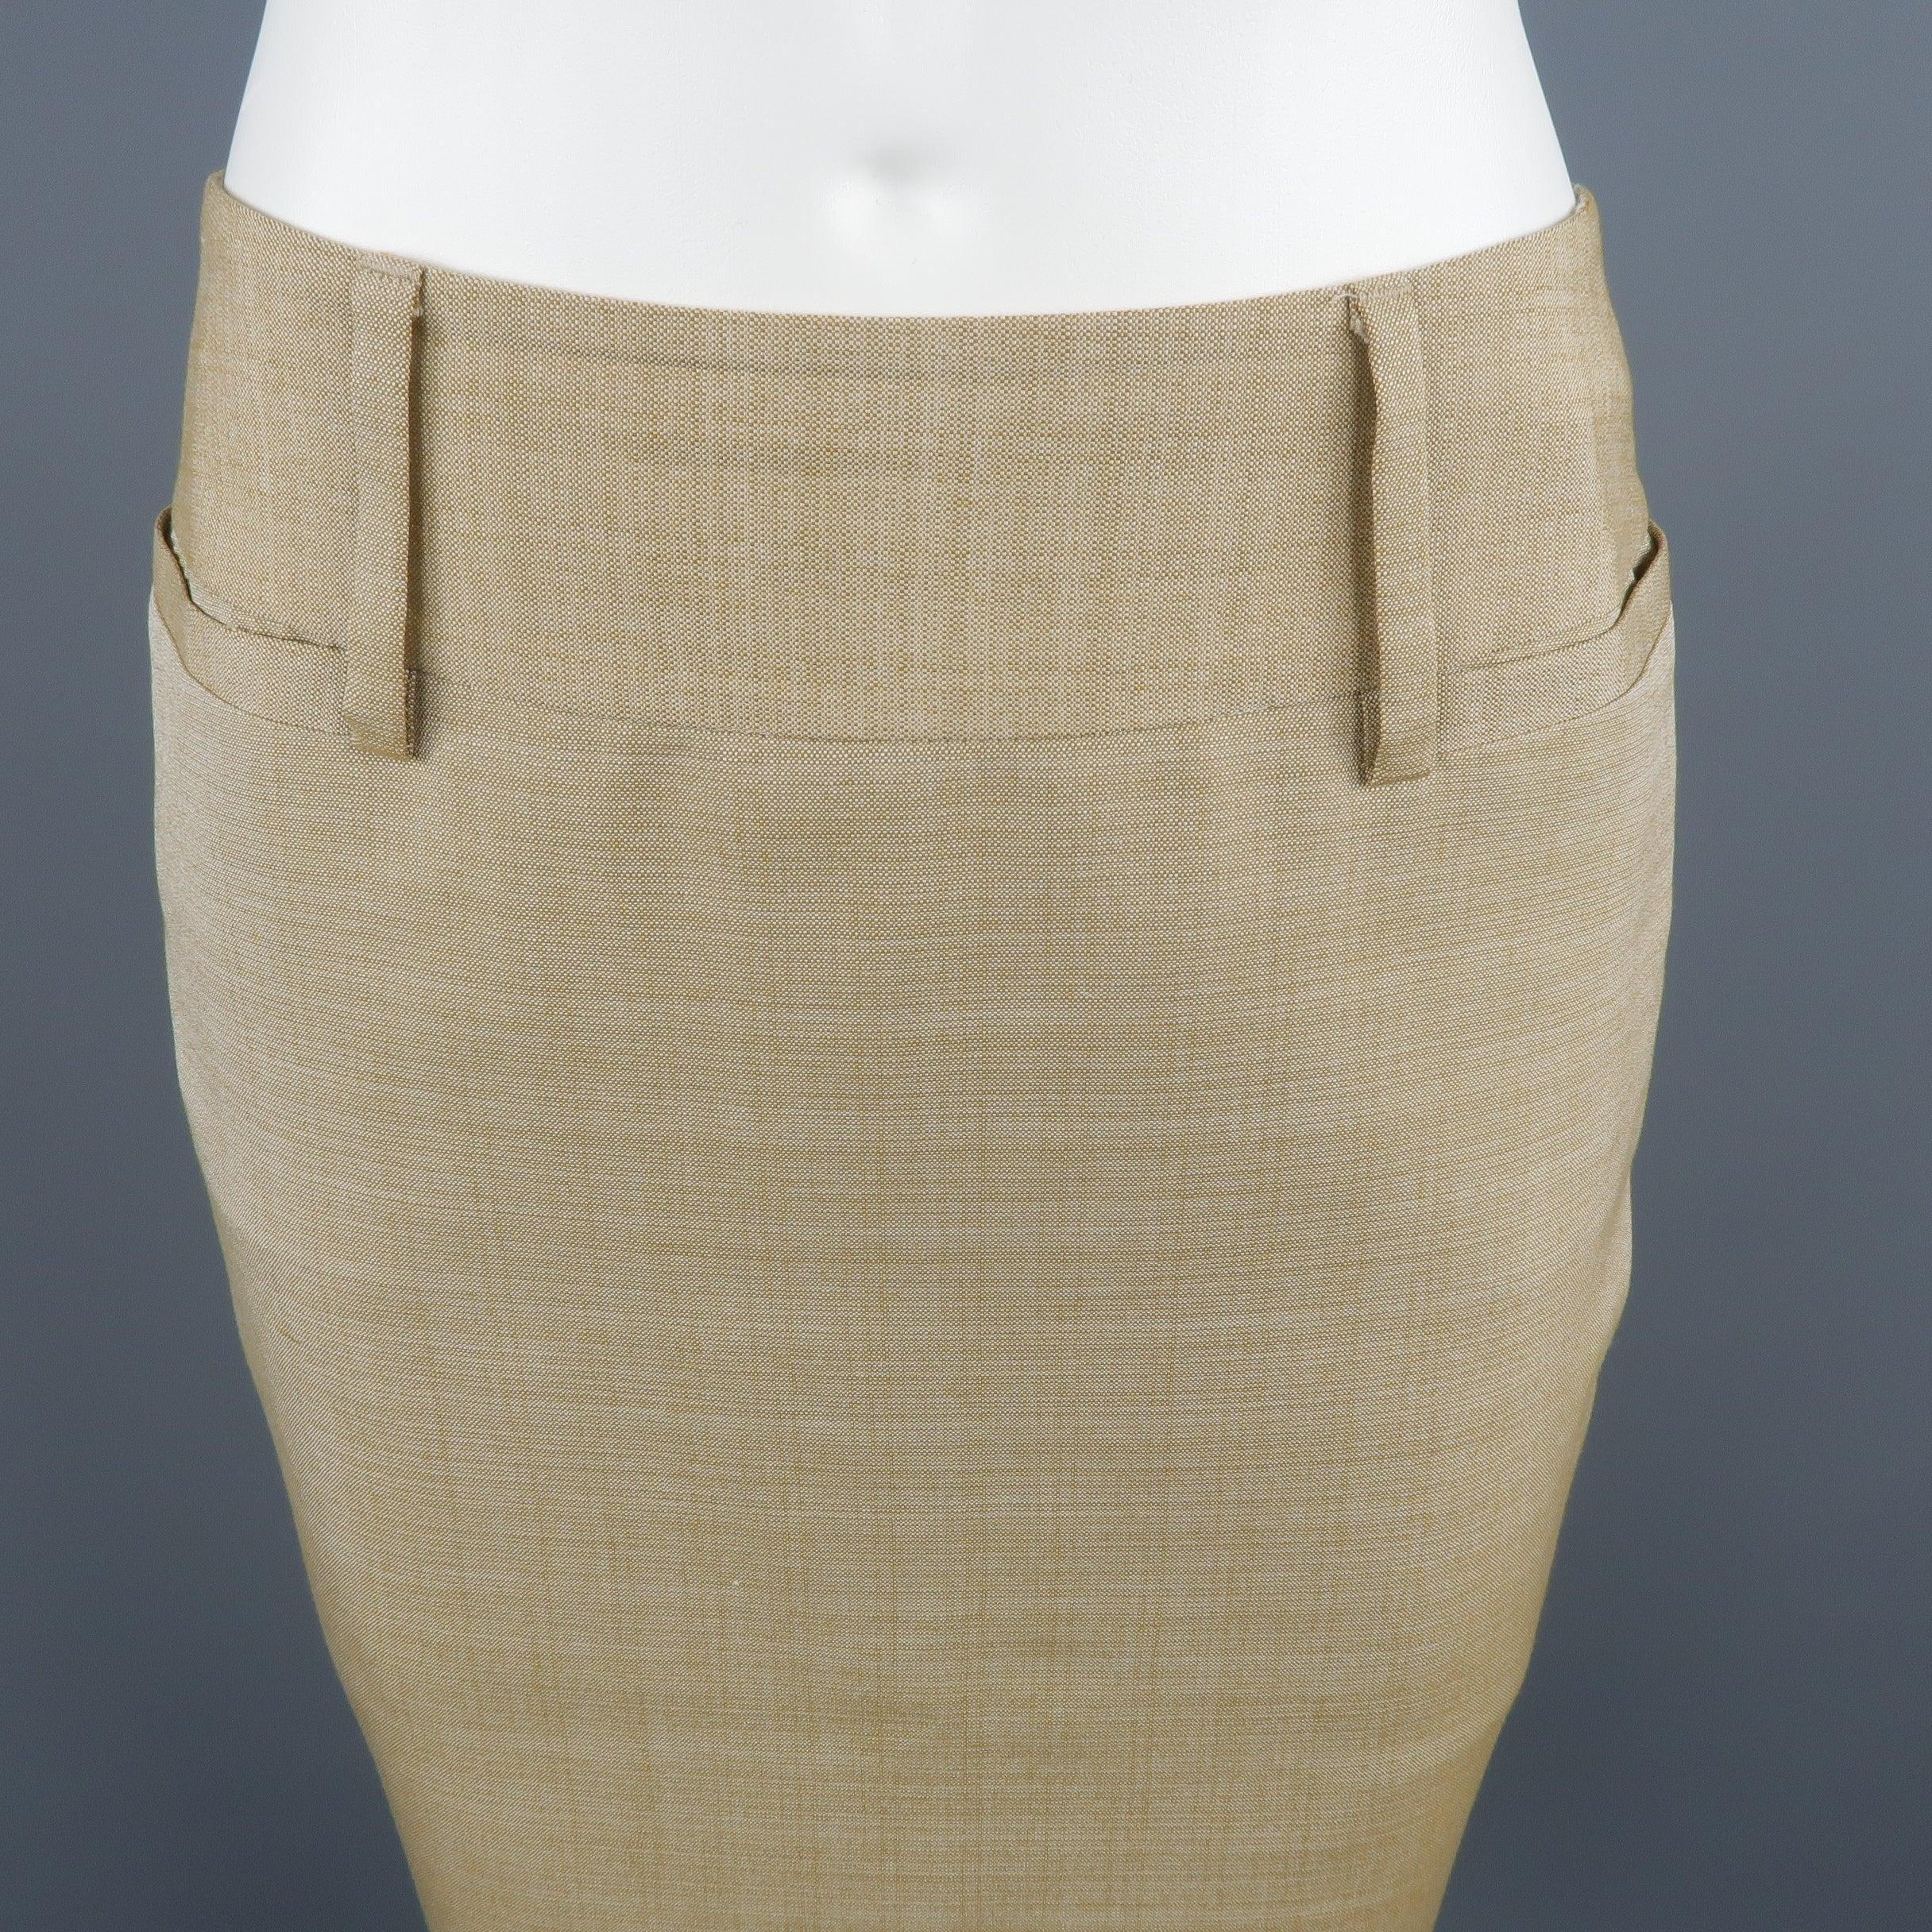 DOLCE & GABBANA classic pencil skirt, come in beige tone and silk material, featuring frontal pockets, belt loops, vent on the back and animal print lining. Small signal of use, with a peeling close to the hem on the left side. Made in Italy. Good